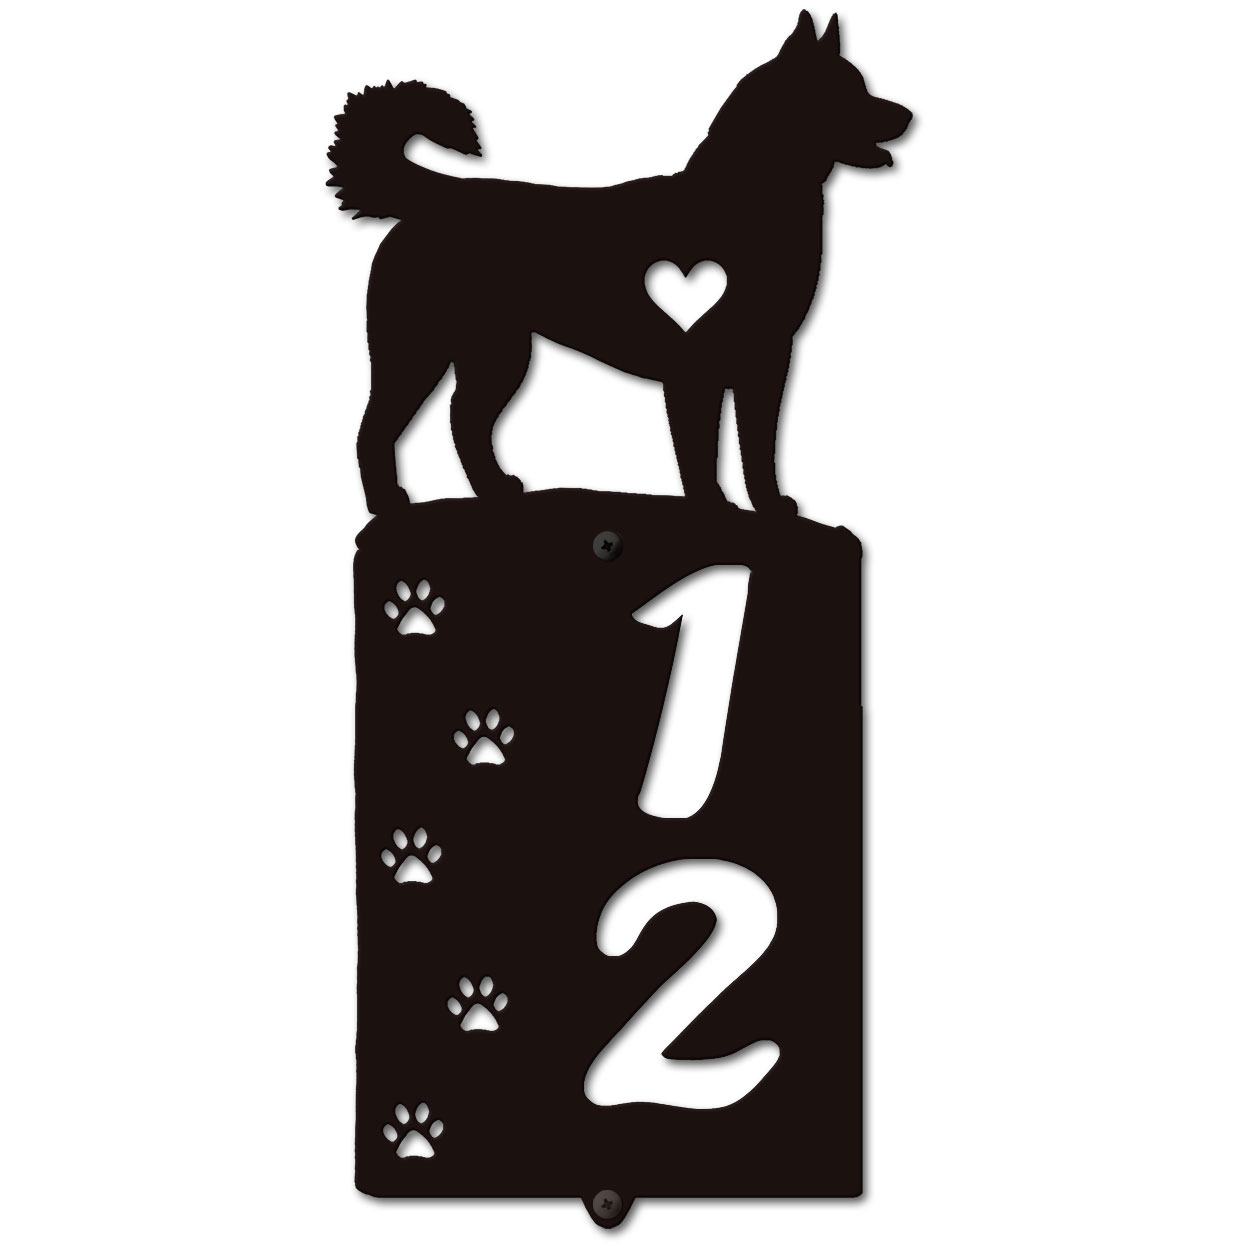 636242 - Husky Cut-Outs Two Digit Address Number Plaque - Choose Size and Color